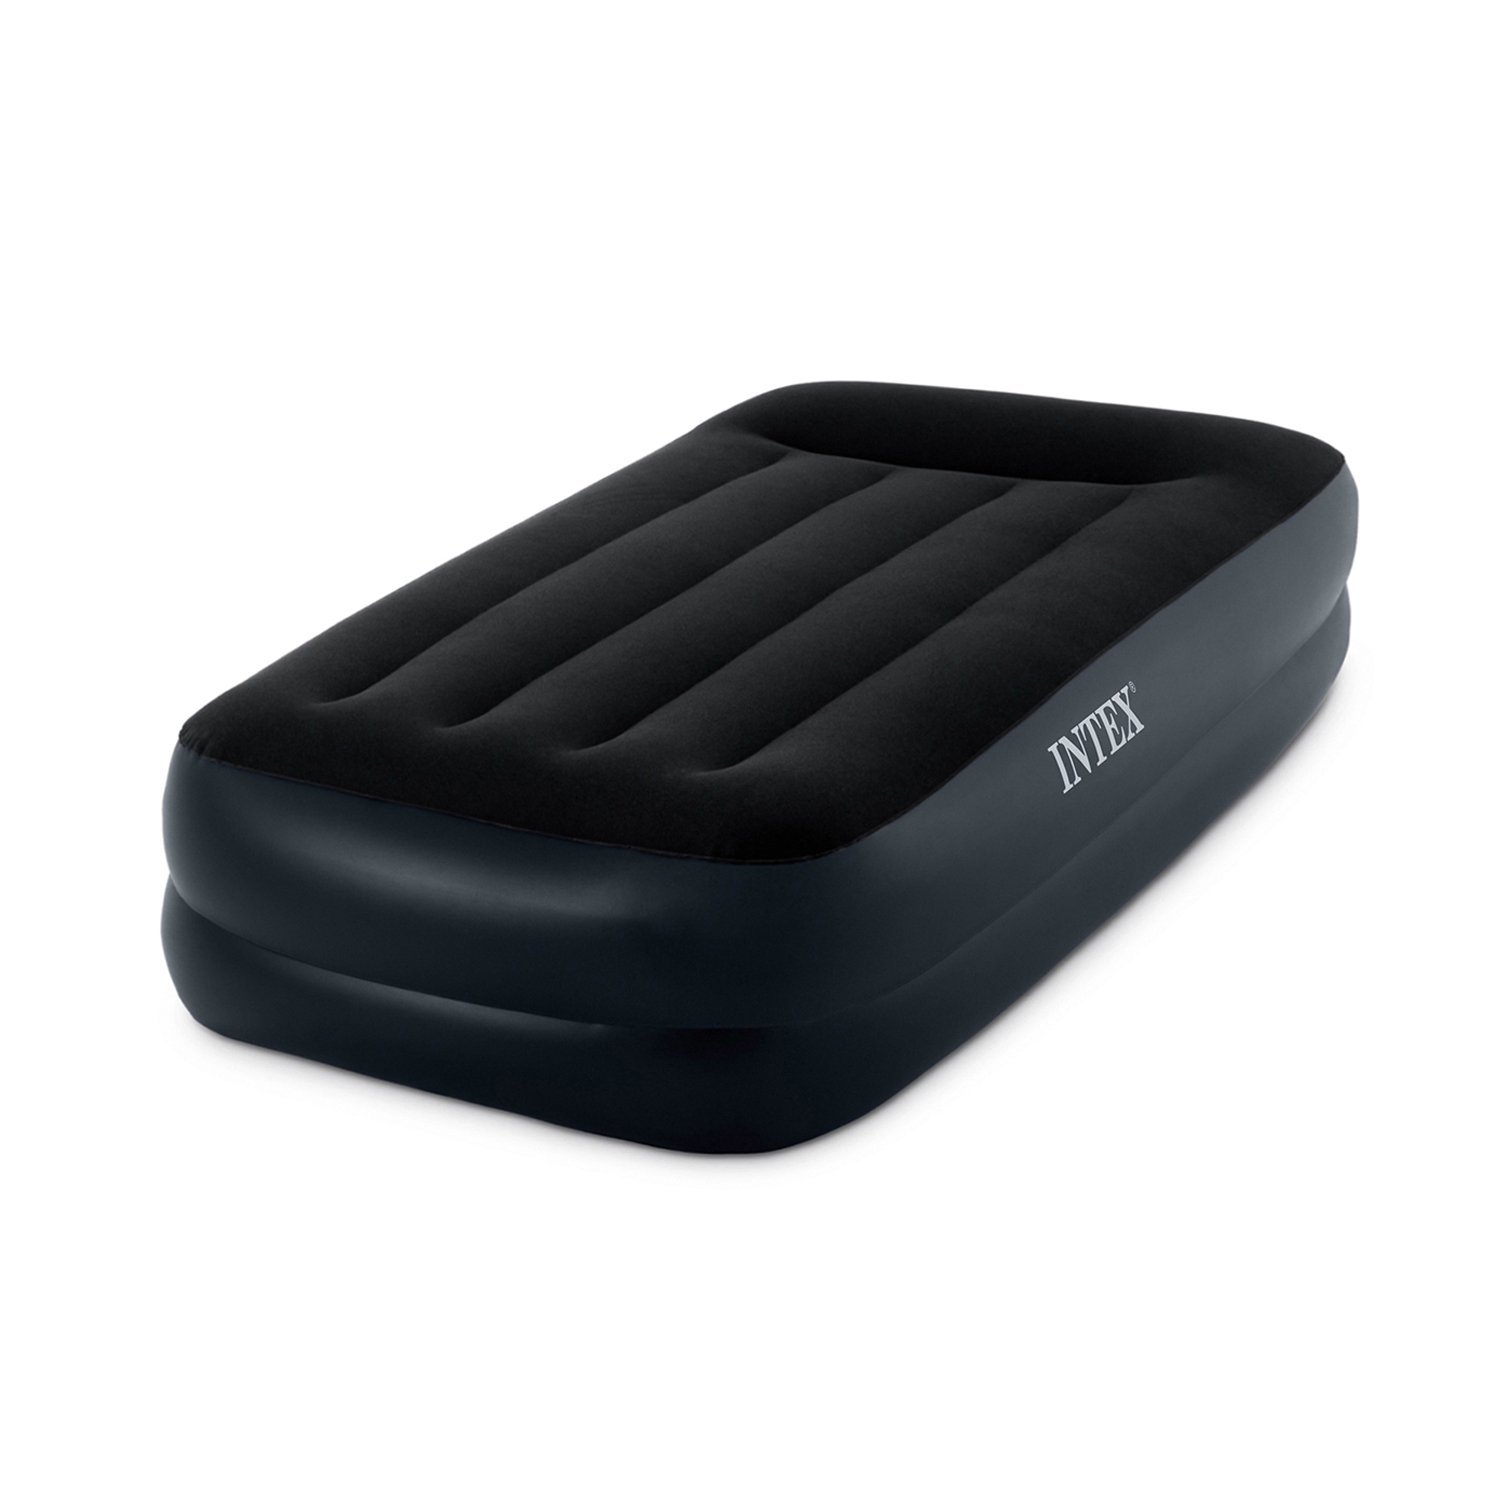 Today only: Intex twin airbed mattress with pump for $20